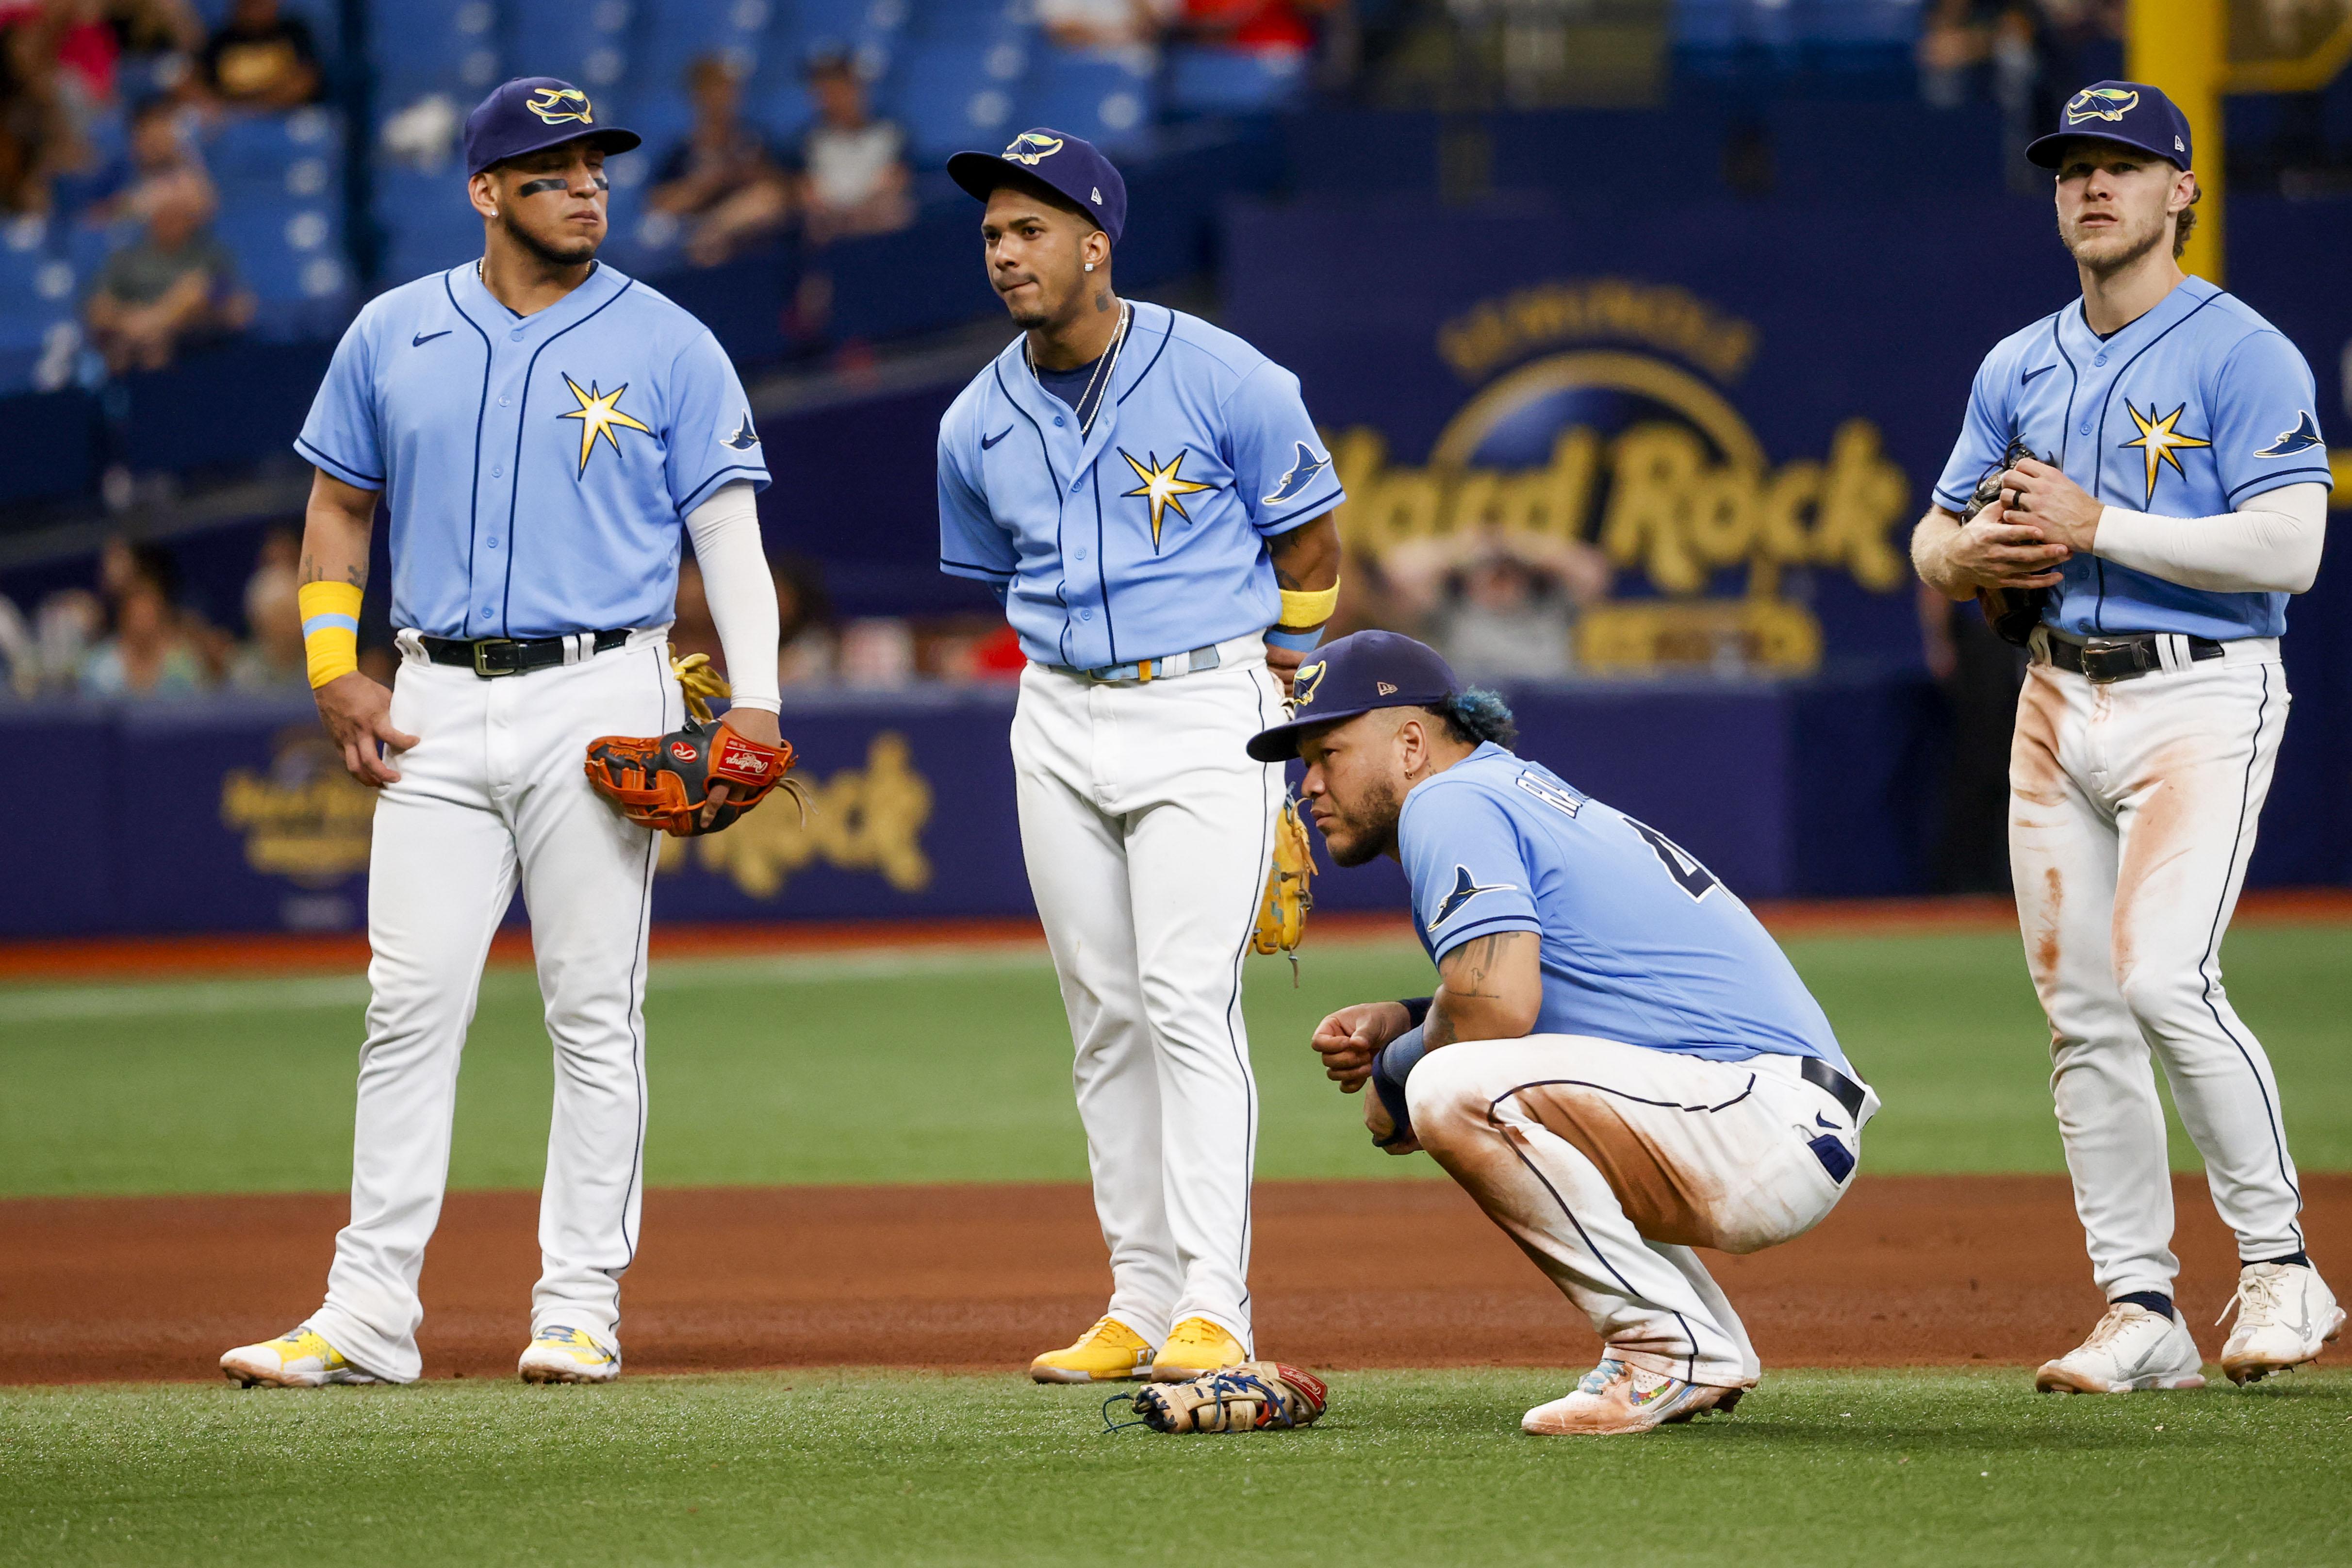 Summer Reading For Kids With Tampa Bay Rays Program